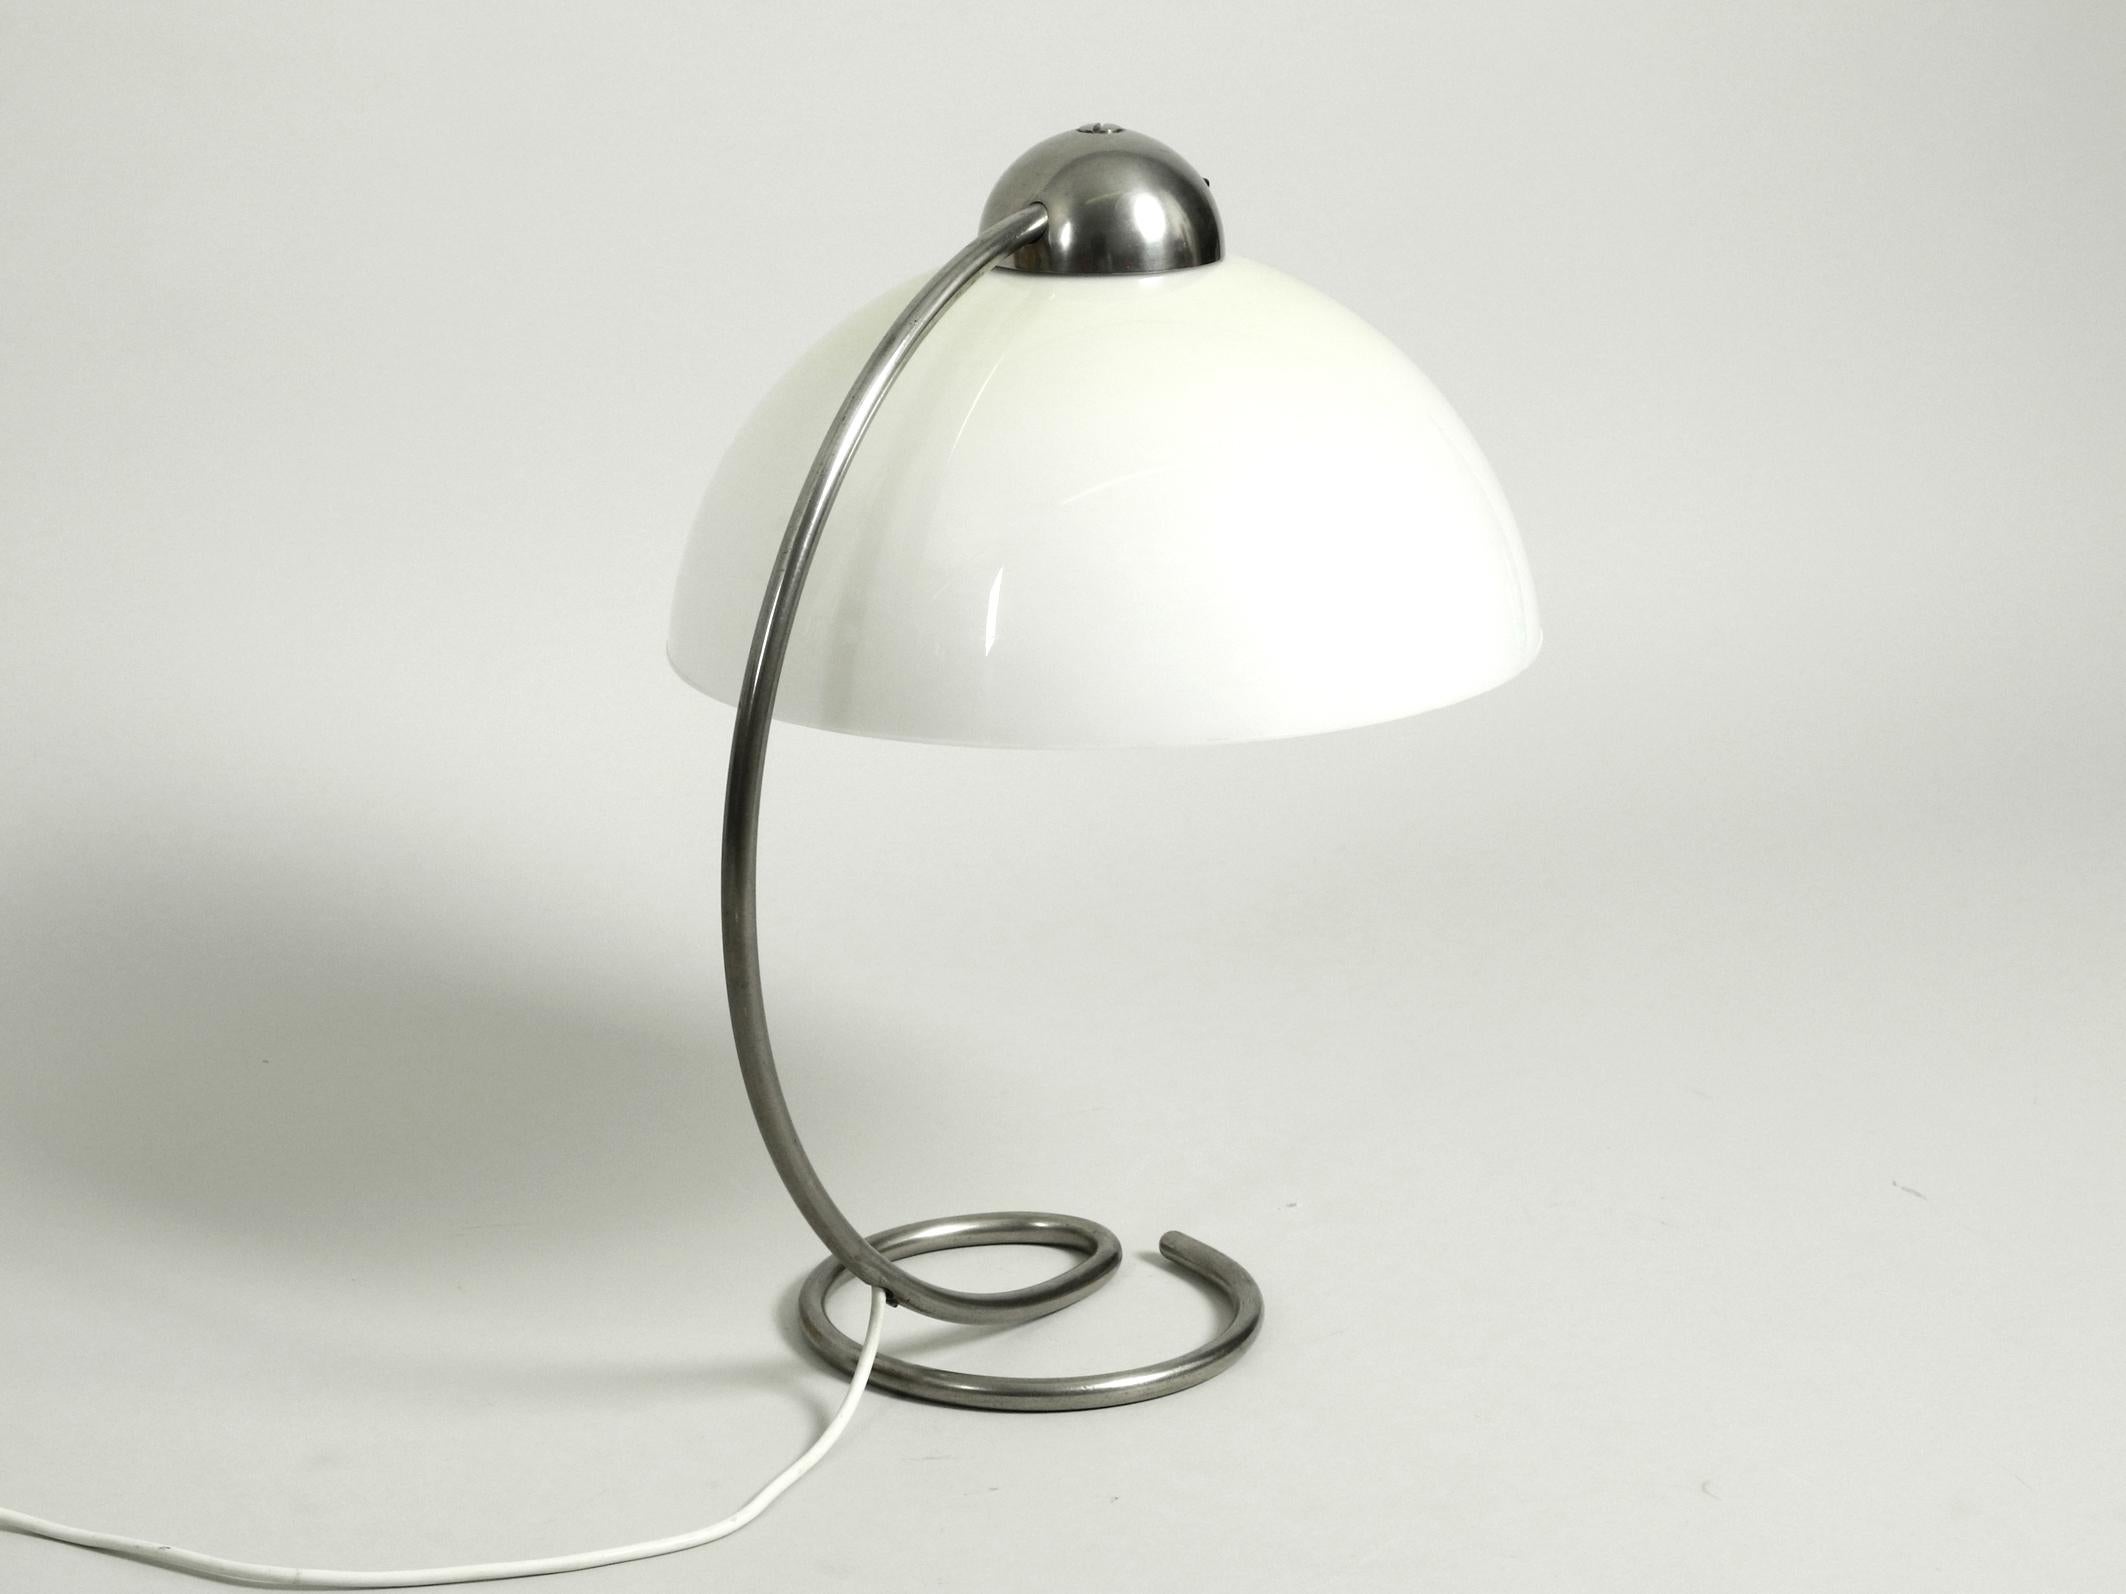 Large, very rare midcentury table lamp with plastic shade. Nickel-plated metal frame. Manufacturer is Schanzenbach & Co. Made in Germany
Made in the 1950s. Great Art Deco design in an unusual design.
One on-off rotary switch above the shade.
Very